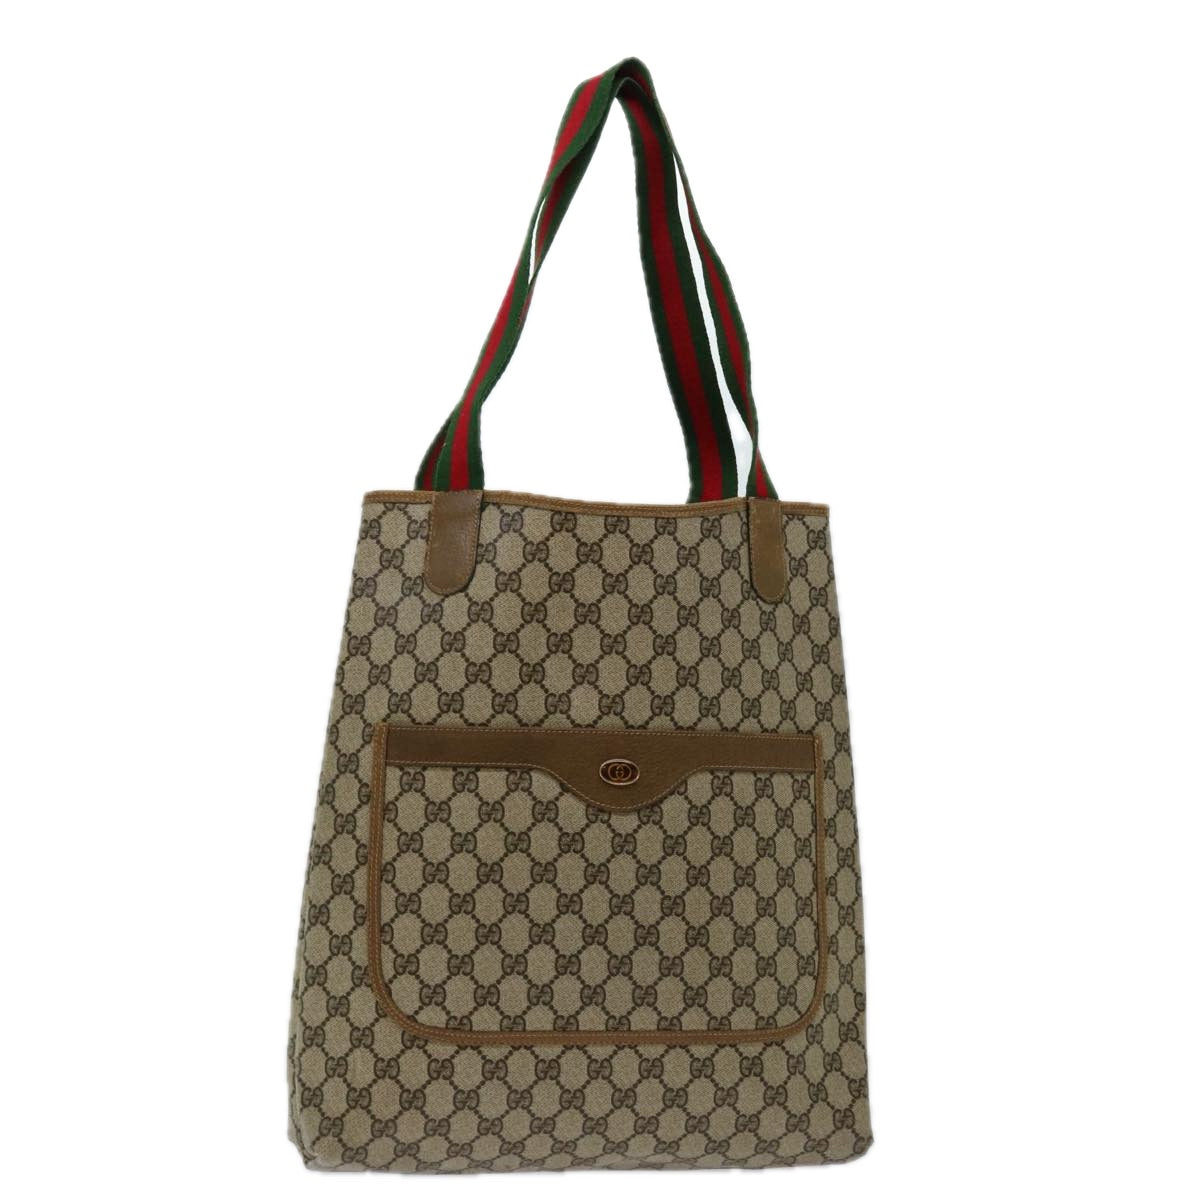 GUCCI GG Canvas Web Sherry Line Tote Bag Red Beige Green 02 003 53 Auth yk11174